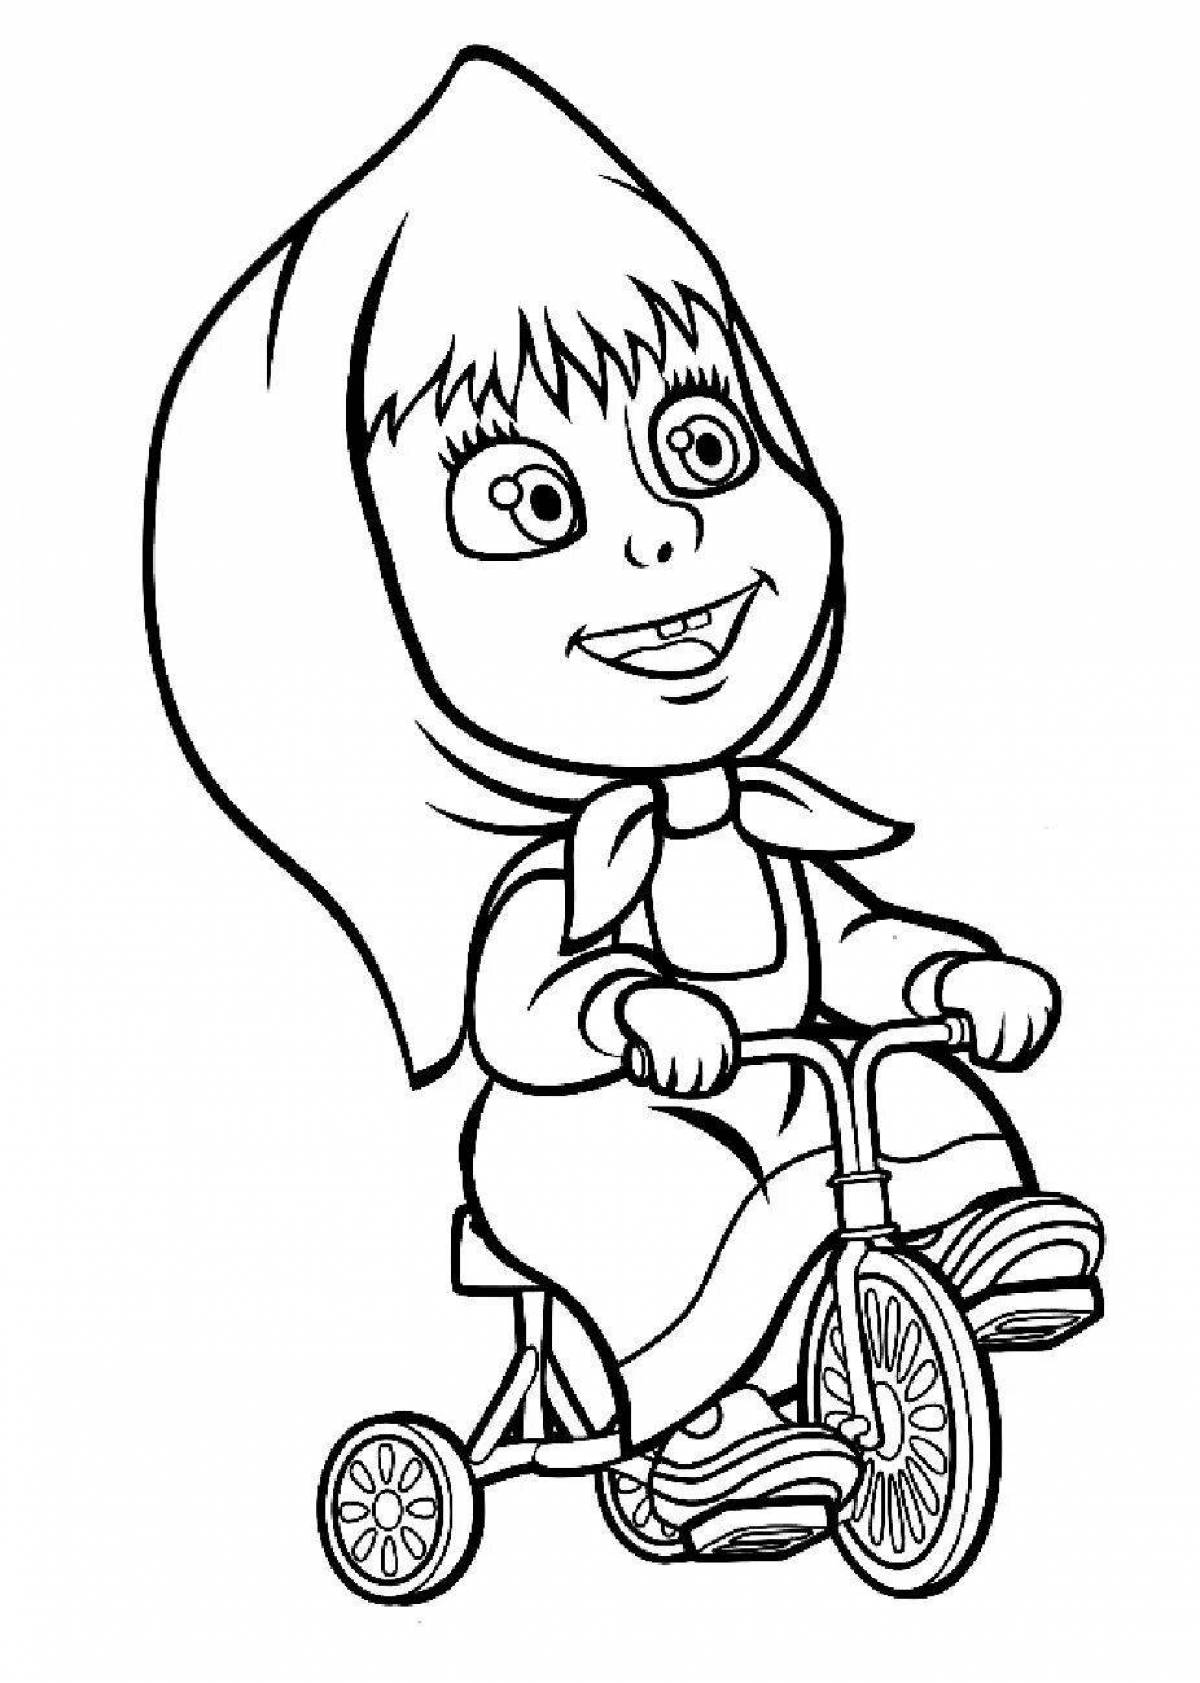 Coloring pages Masha and the Bear